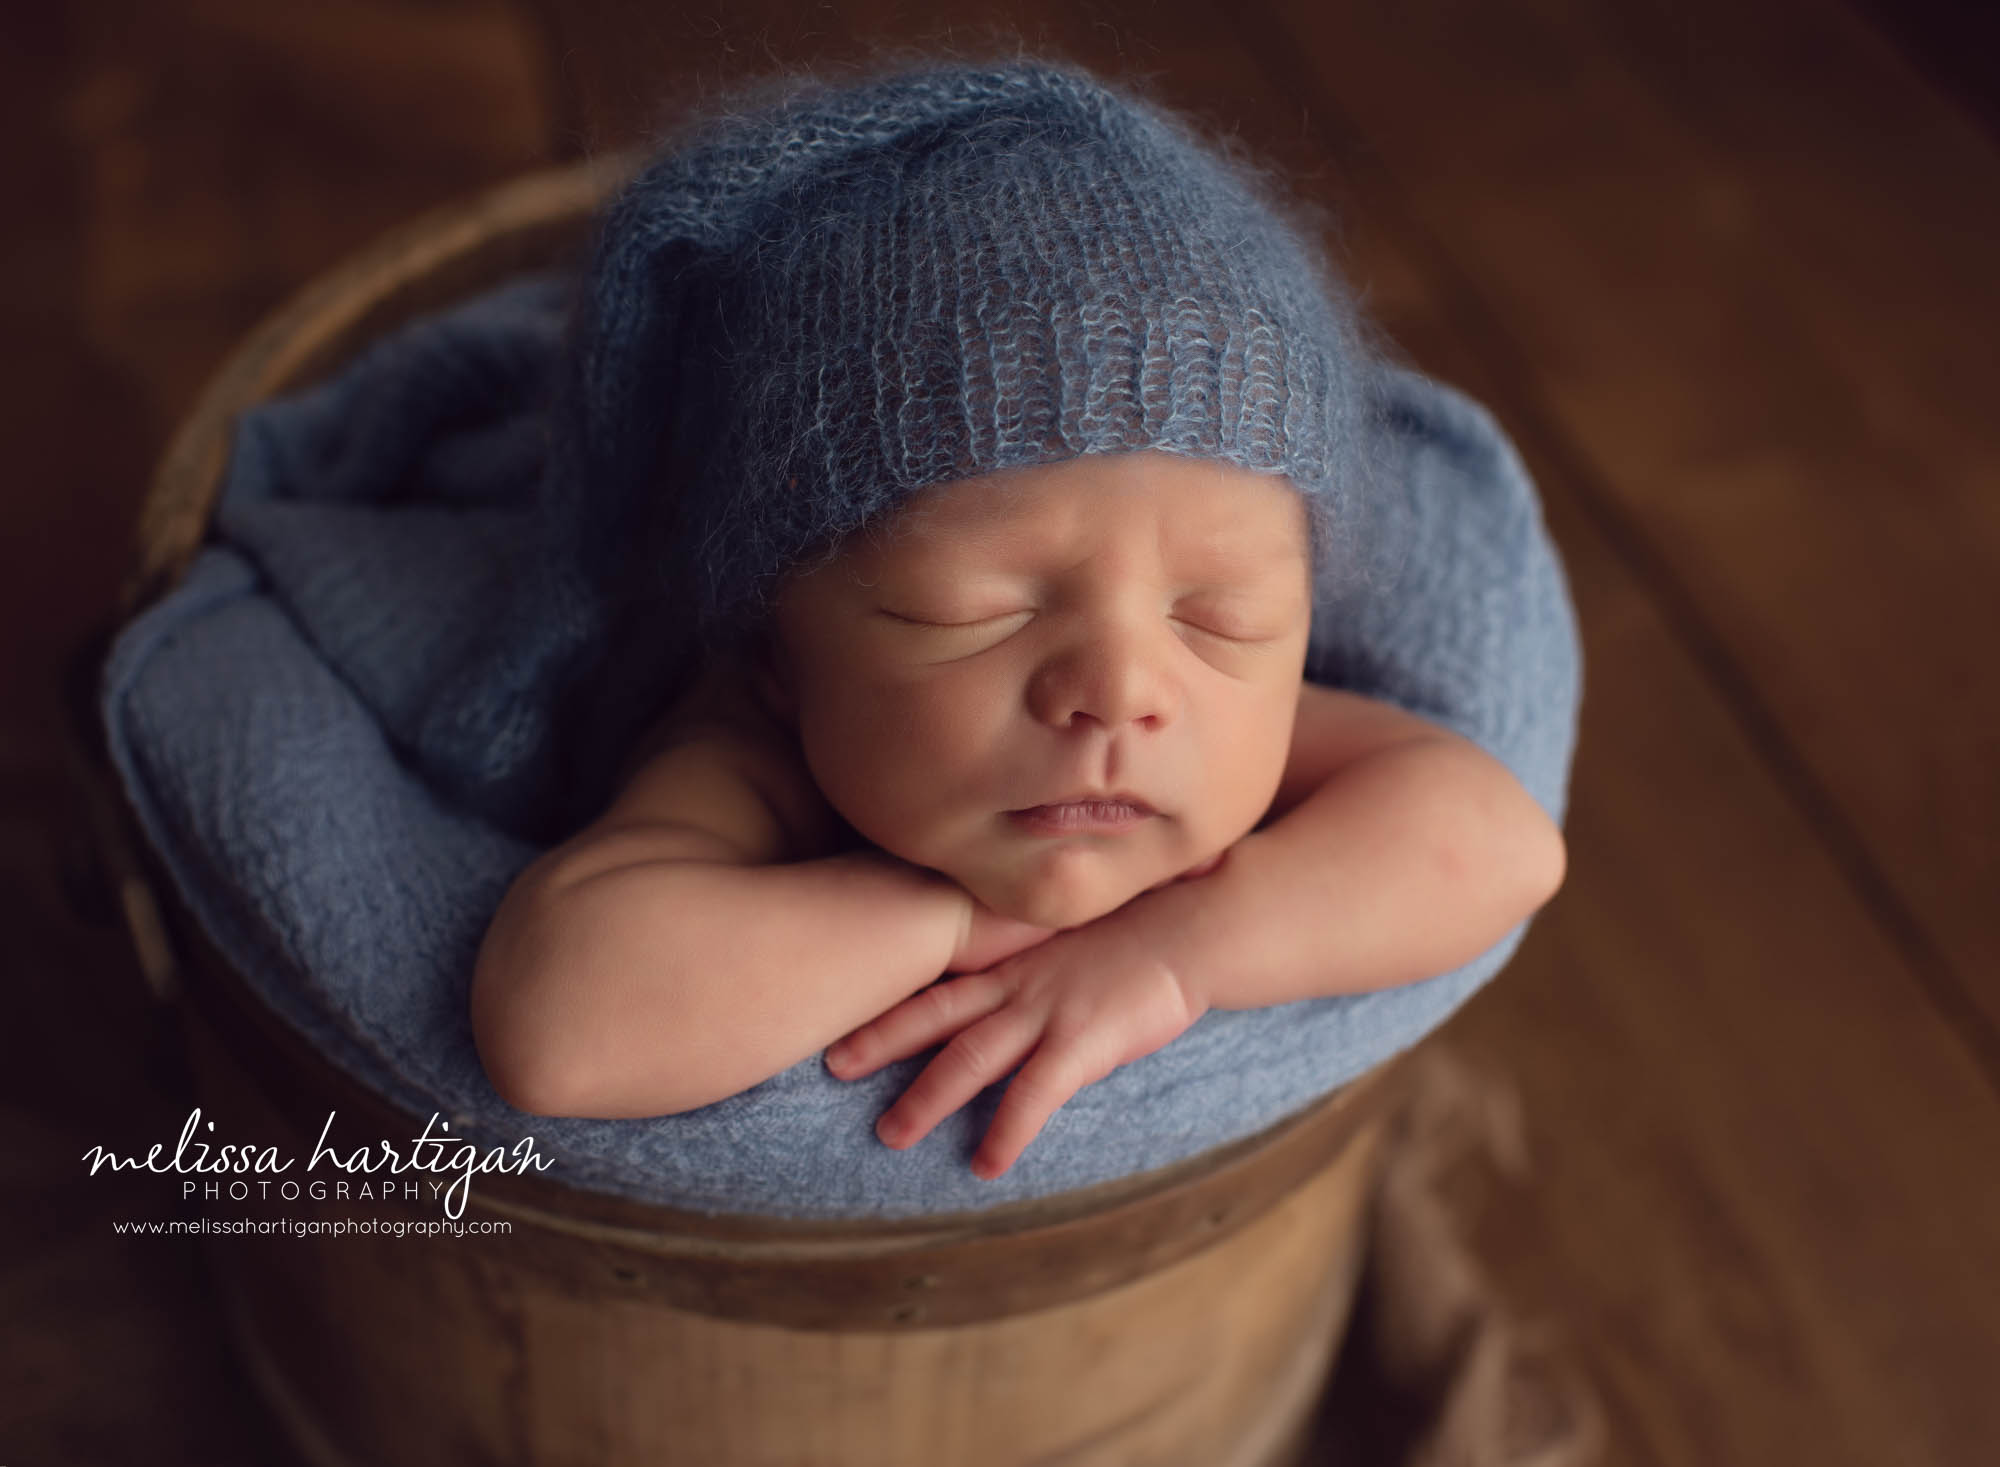 Baby boy posed newborn photography pictures posed in rustic bucket with blue knitted sleepy cap